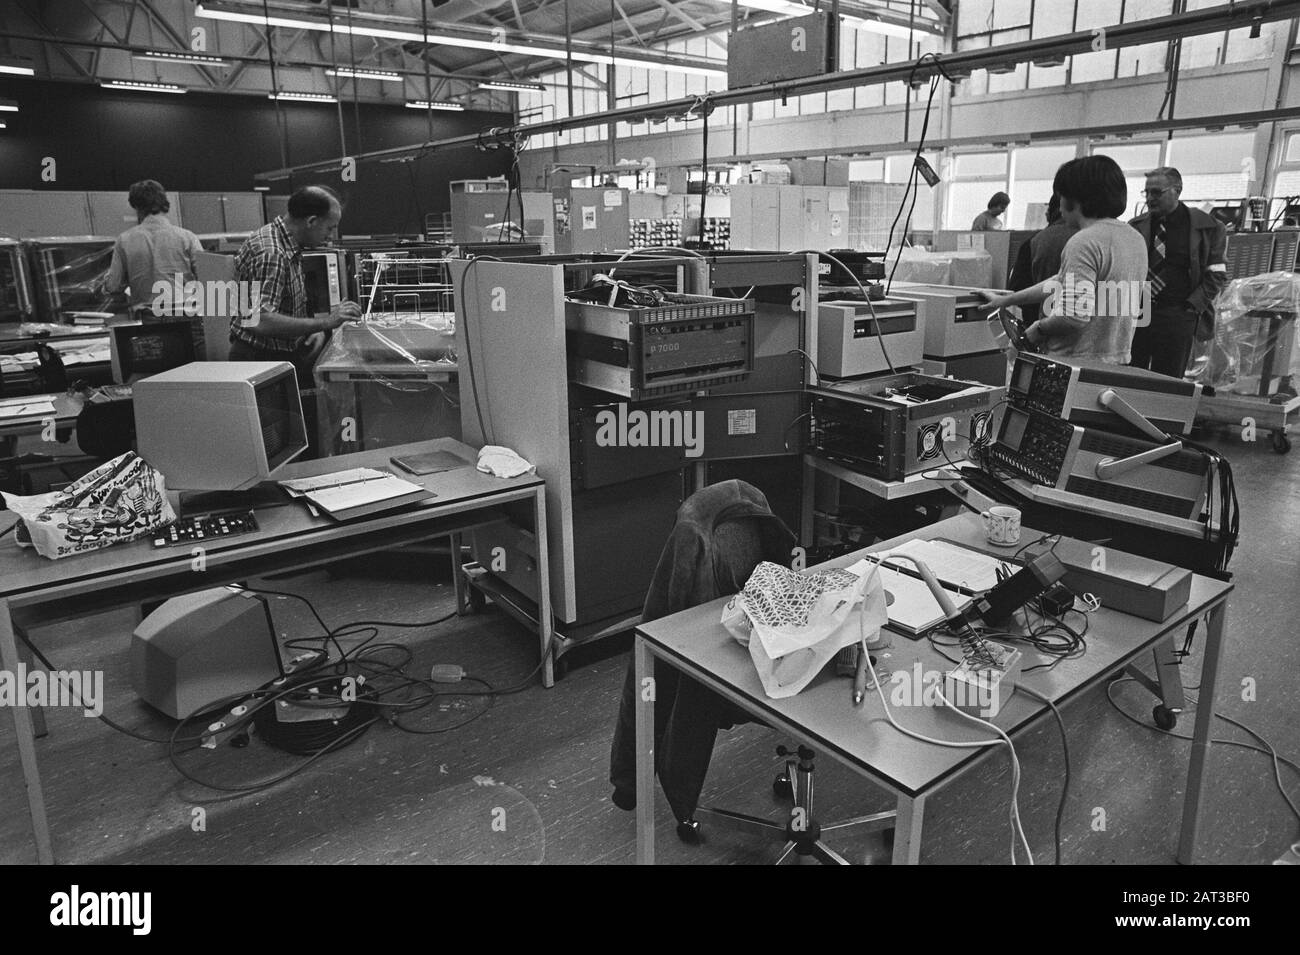 Philips Data Systems in The Hague with support from Unions by personnel occupied in connection with impending closure  The staff of the company manufacturing computer equipment works simply by Date: 27 October 1981 Location: The Hague, Zuid-Holland Keywords: companies, computers, staff members Institution name: Philips Data Stock Photo